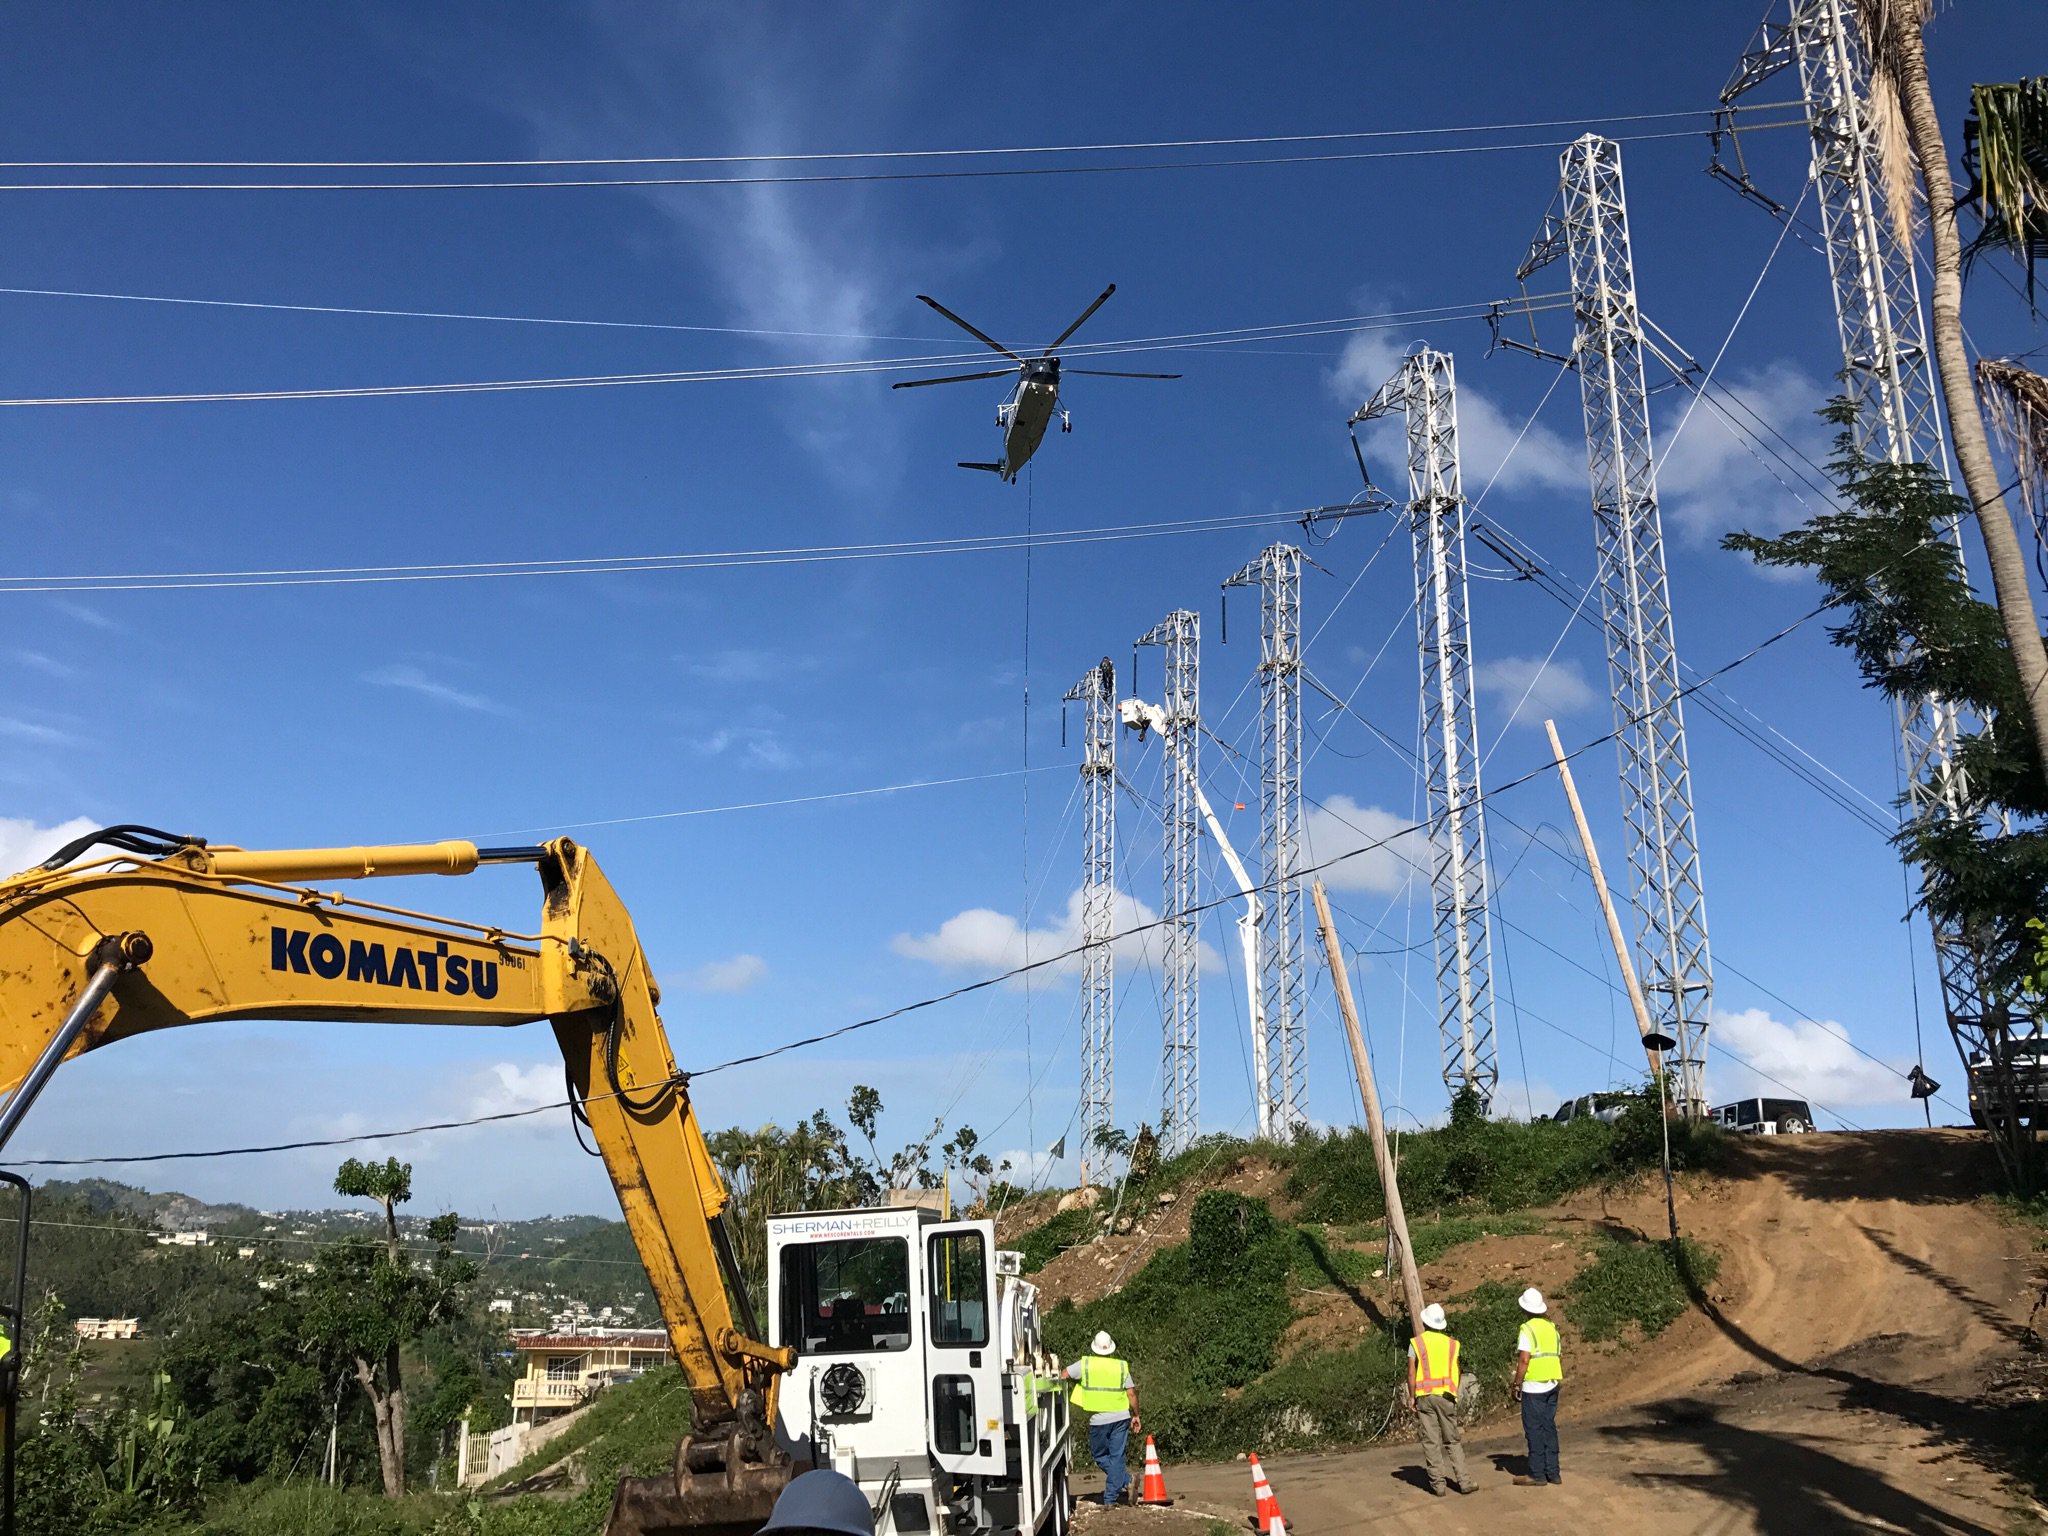 Caribbean Business on Twitter: &quot;Puerto Rico grid-repair contract lifts Mammoth  Energy's 1Q results Sees revenue rise 559% compared with same period in 2017  https://t.co/V4CU7iySnh… https://t.co/Nejsfg86AU&quot;